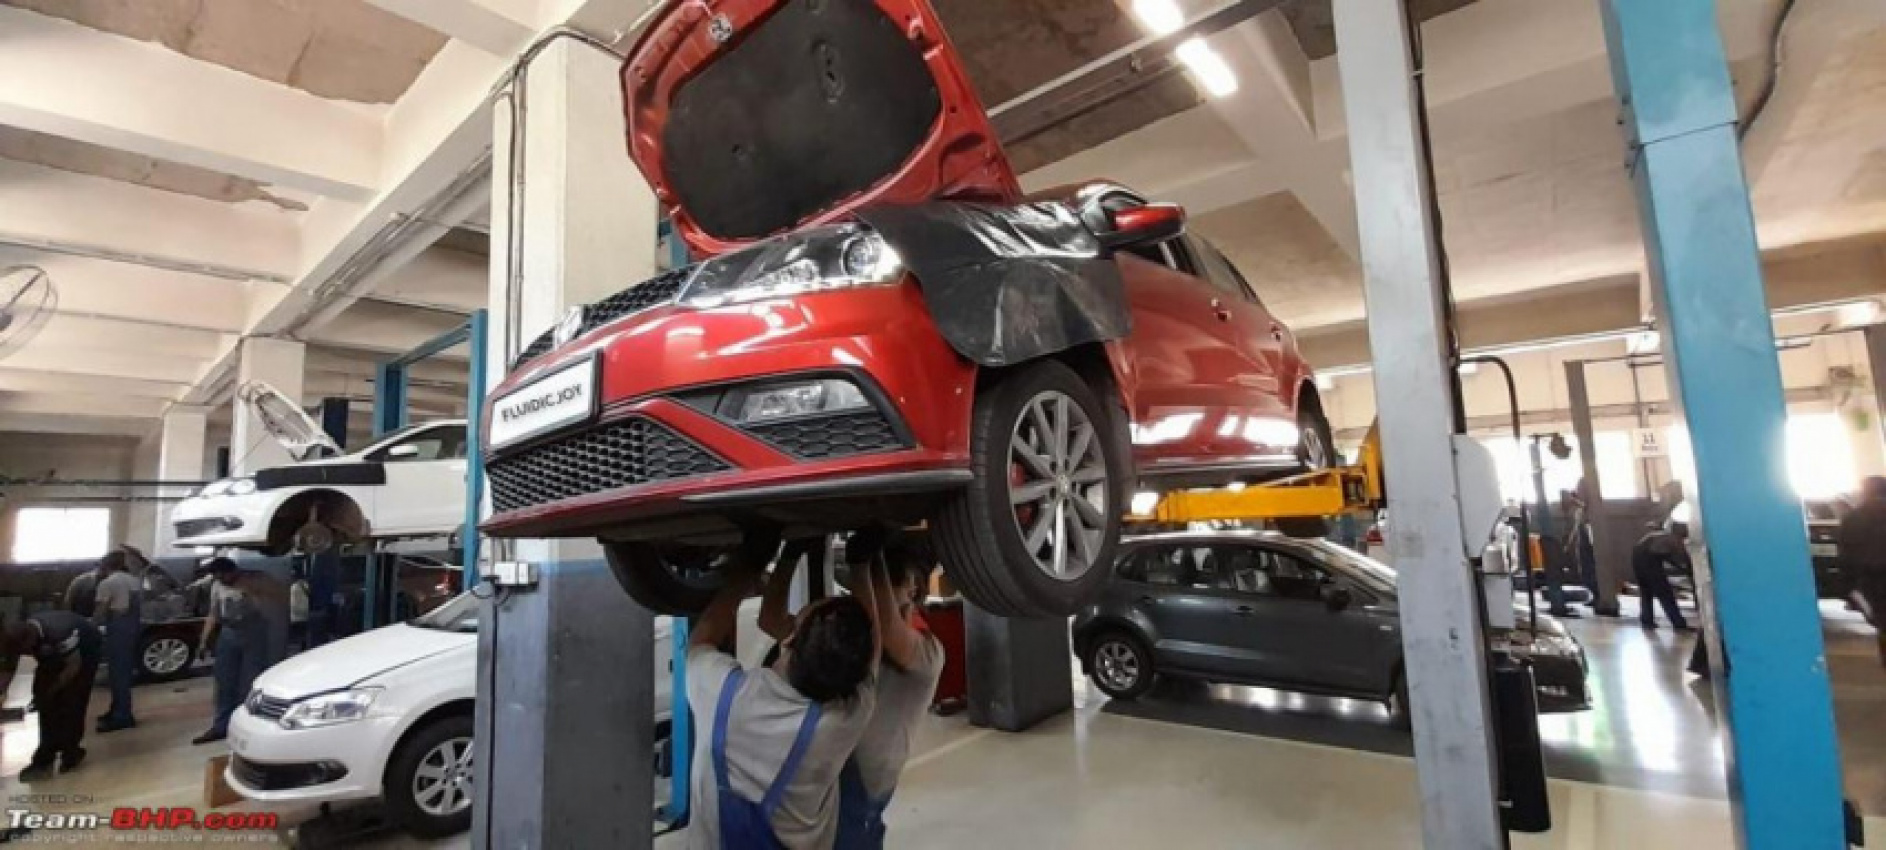 autos, cars, volkswagen, car service, indian, member content, polo, volkswagen polo, volkswagen polo service experience: 1st oil change & other repairs